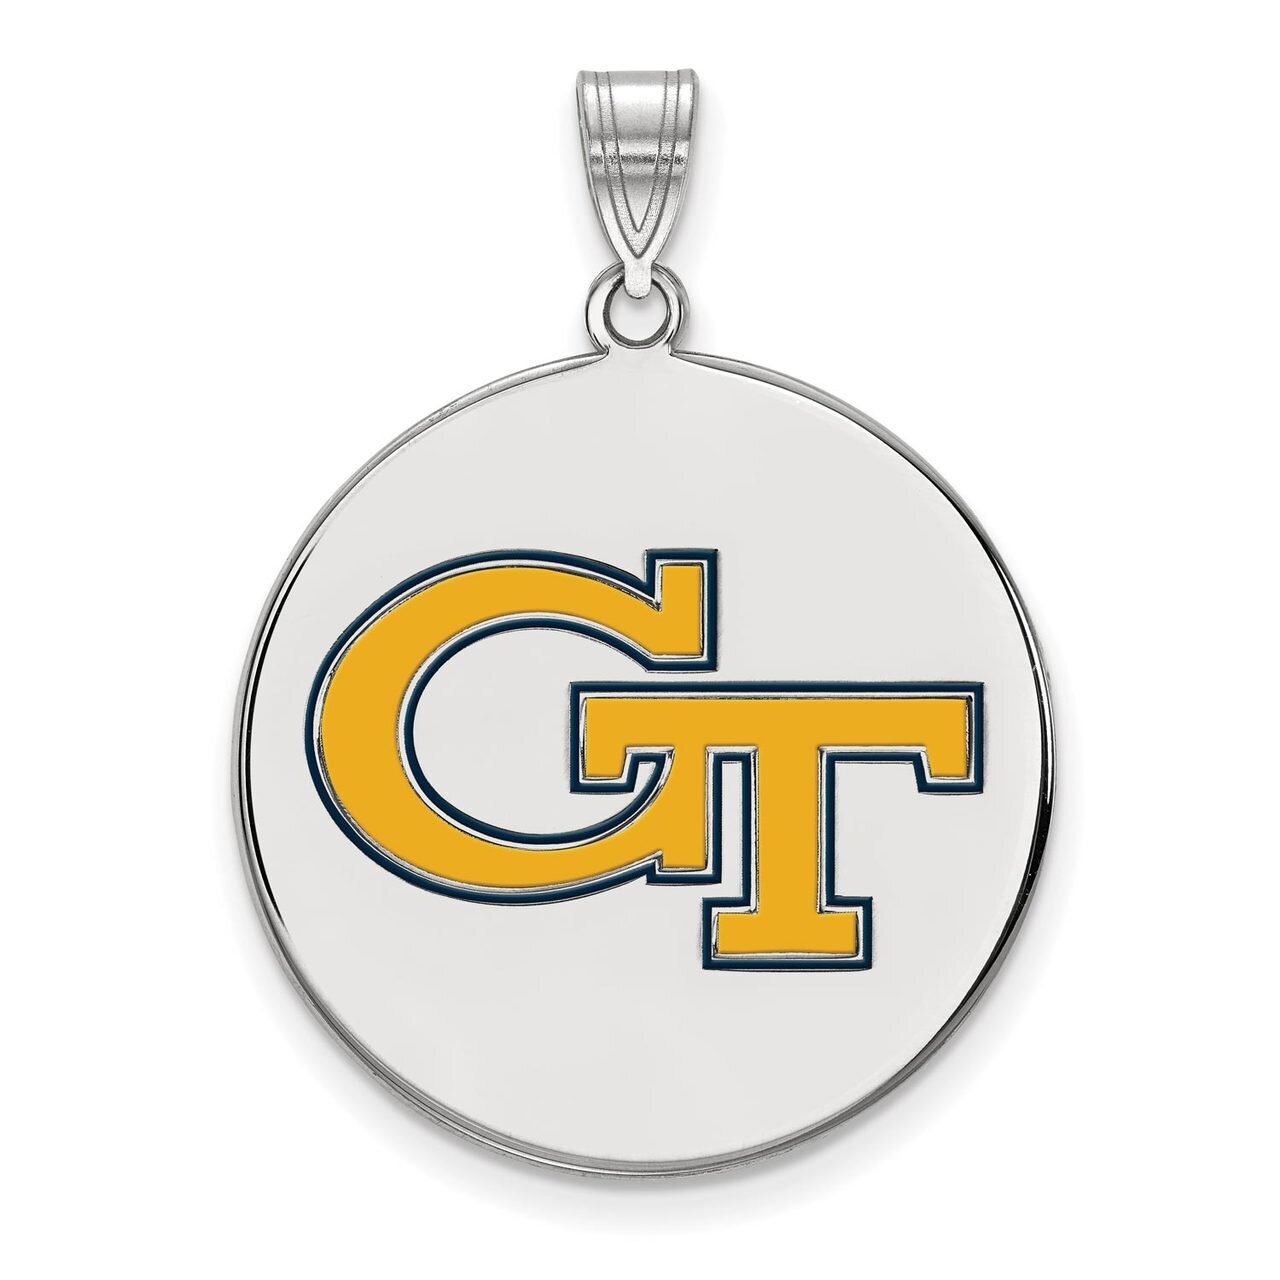 Georgia Institute of Technology Large Enamel Disc Pendant Sterling Silver SS068GT